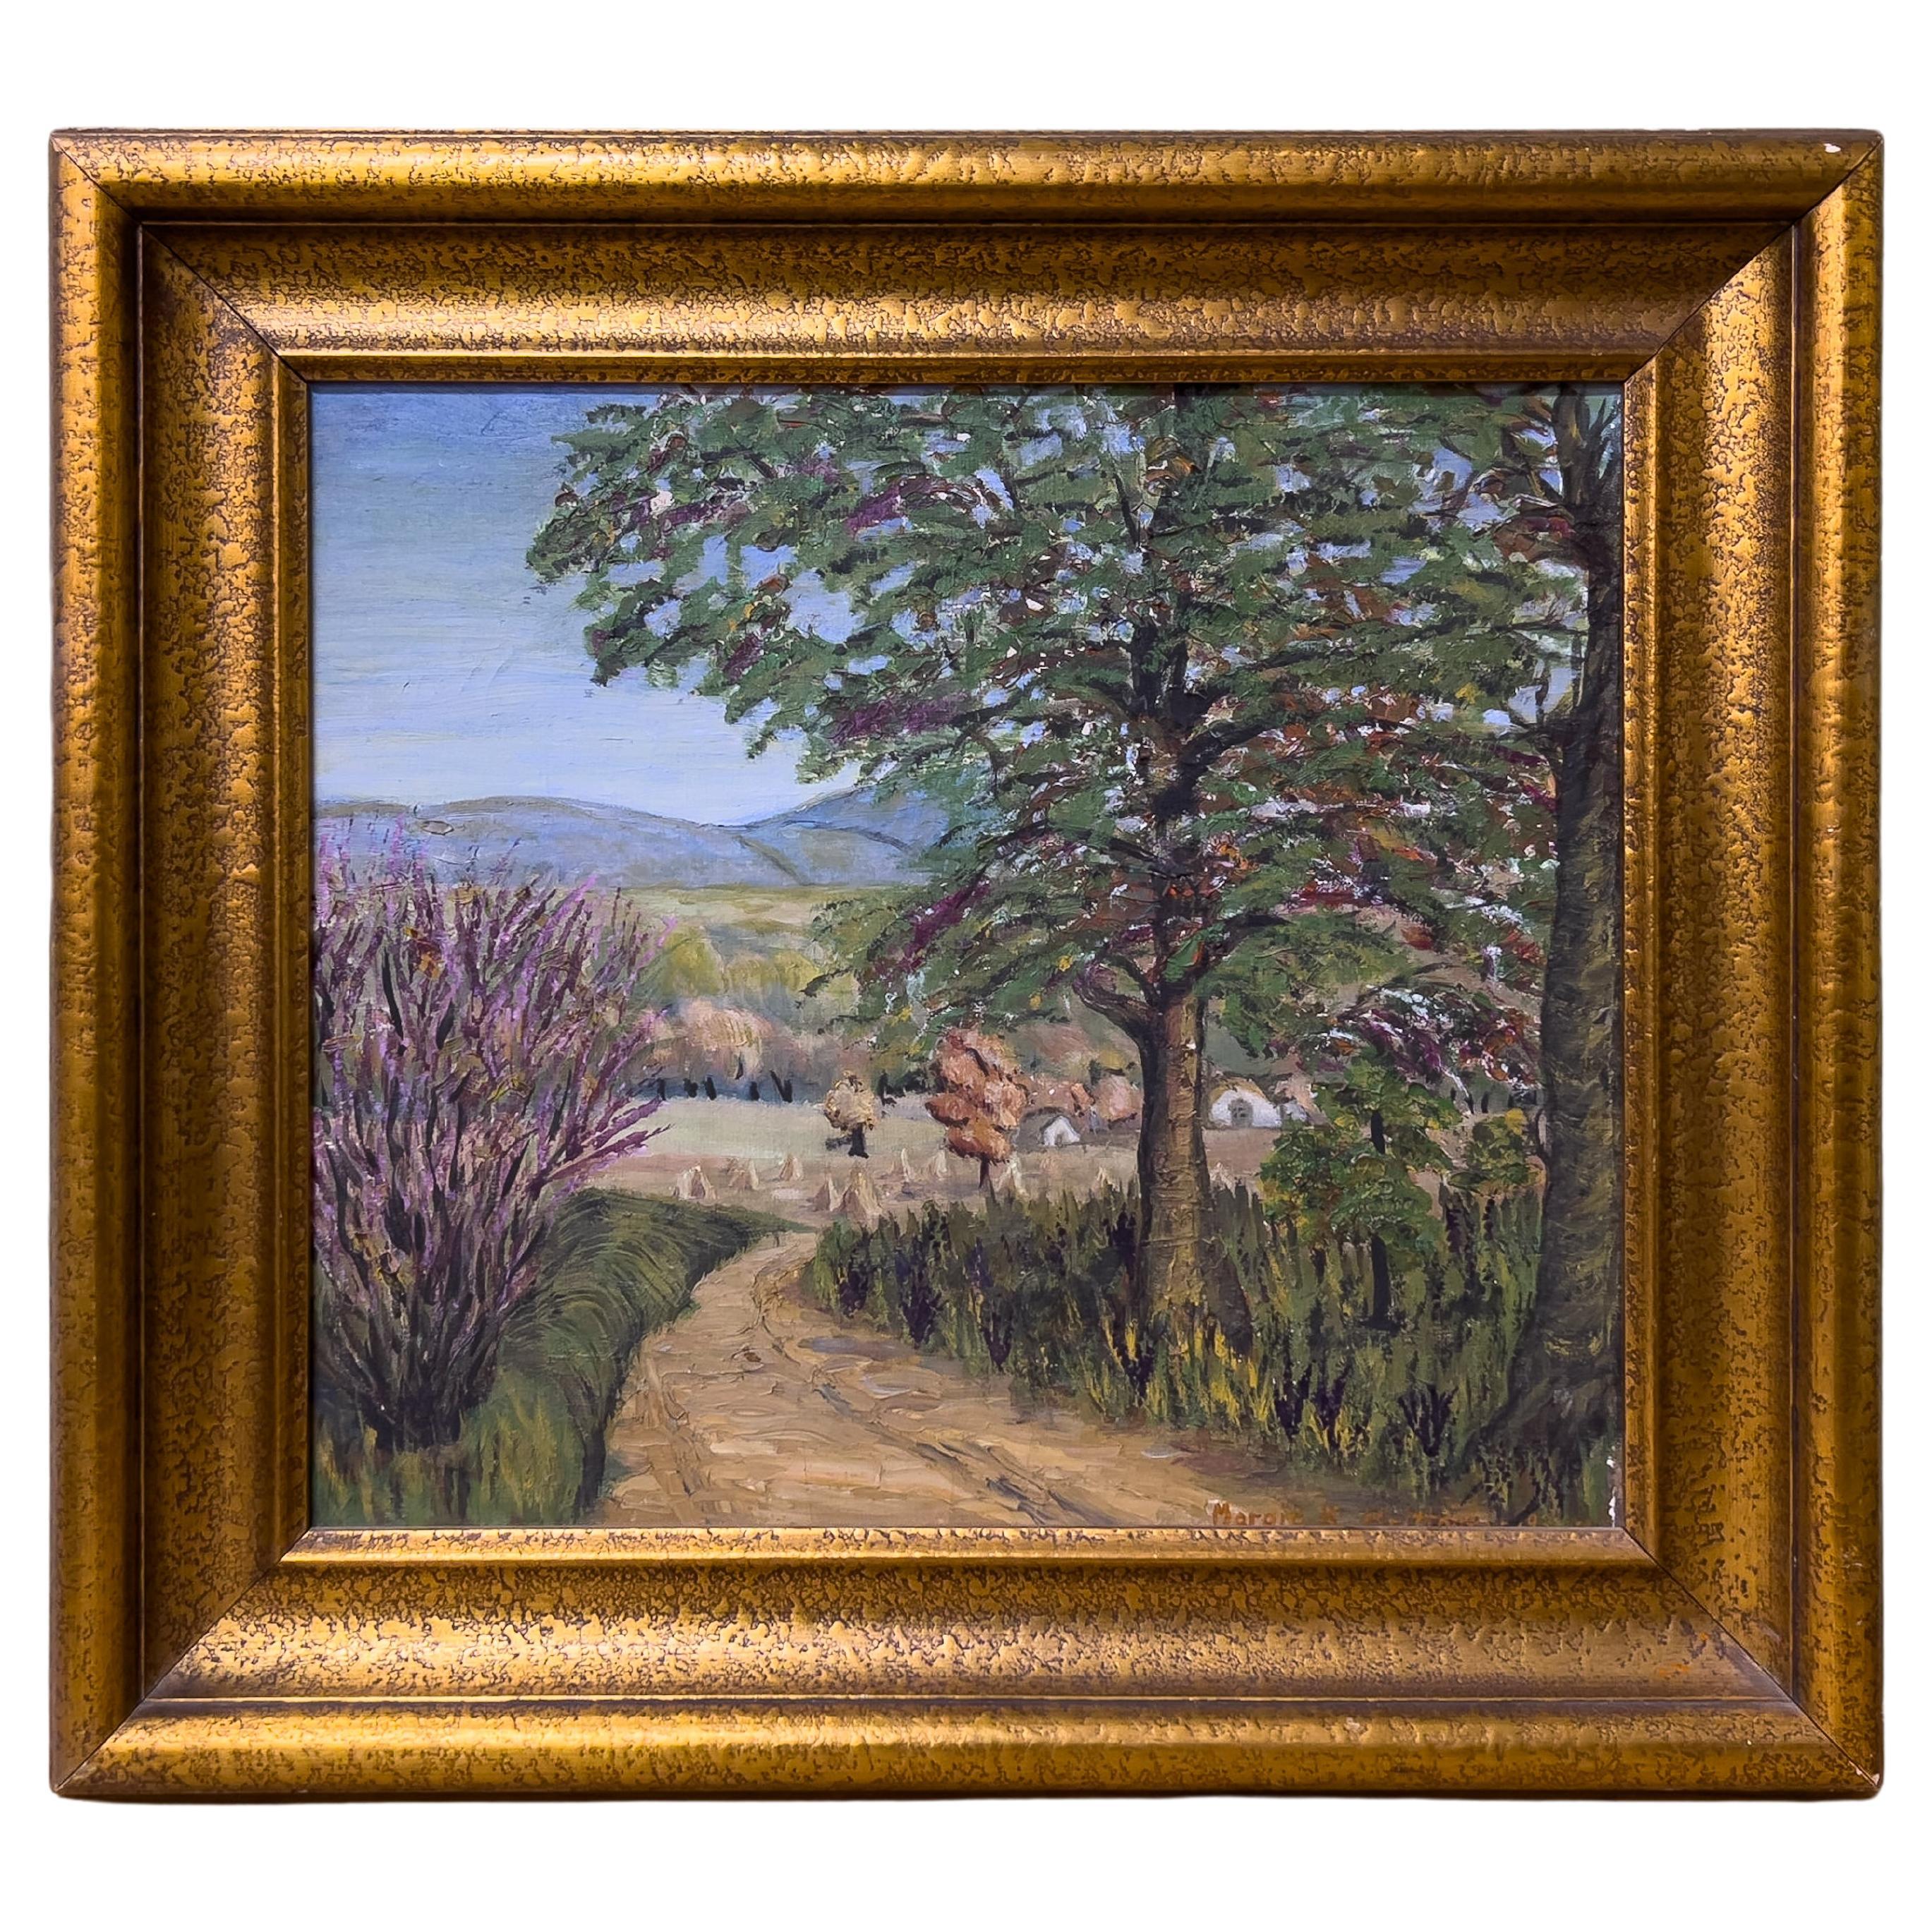 1940's Oil Painting on Canvas of Rural Scene